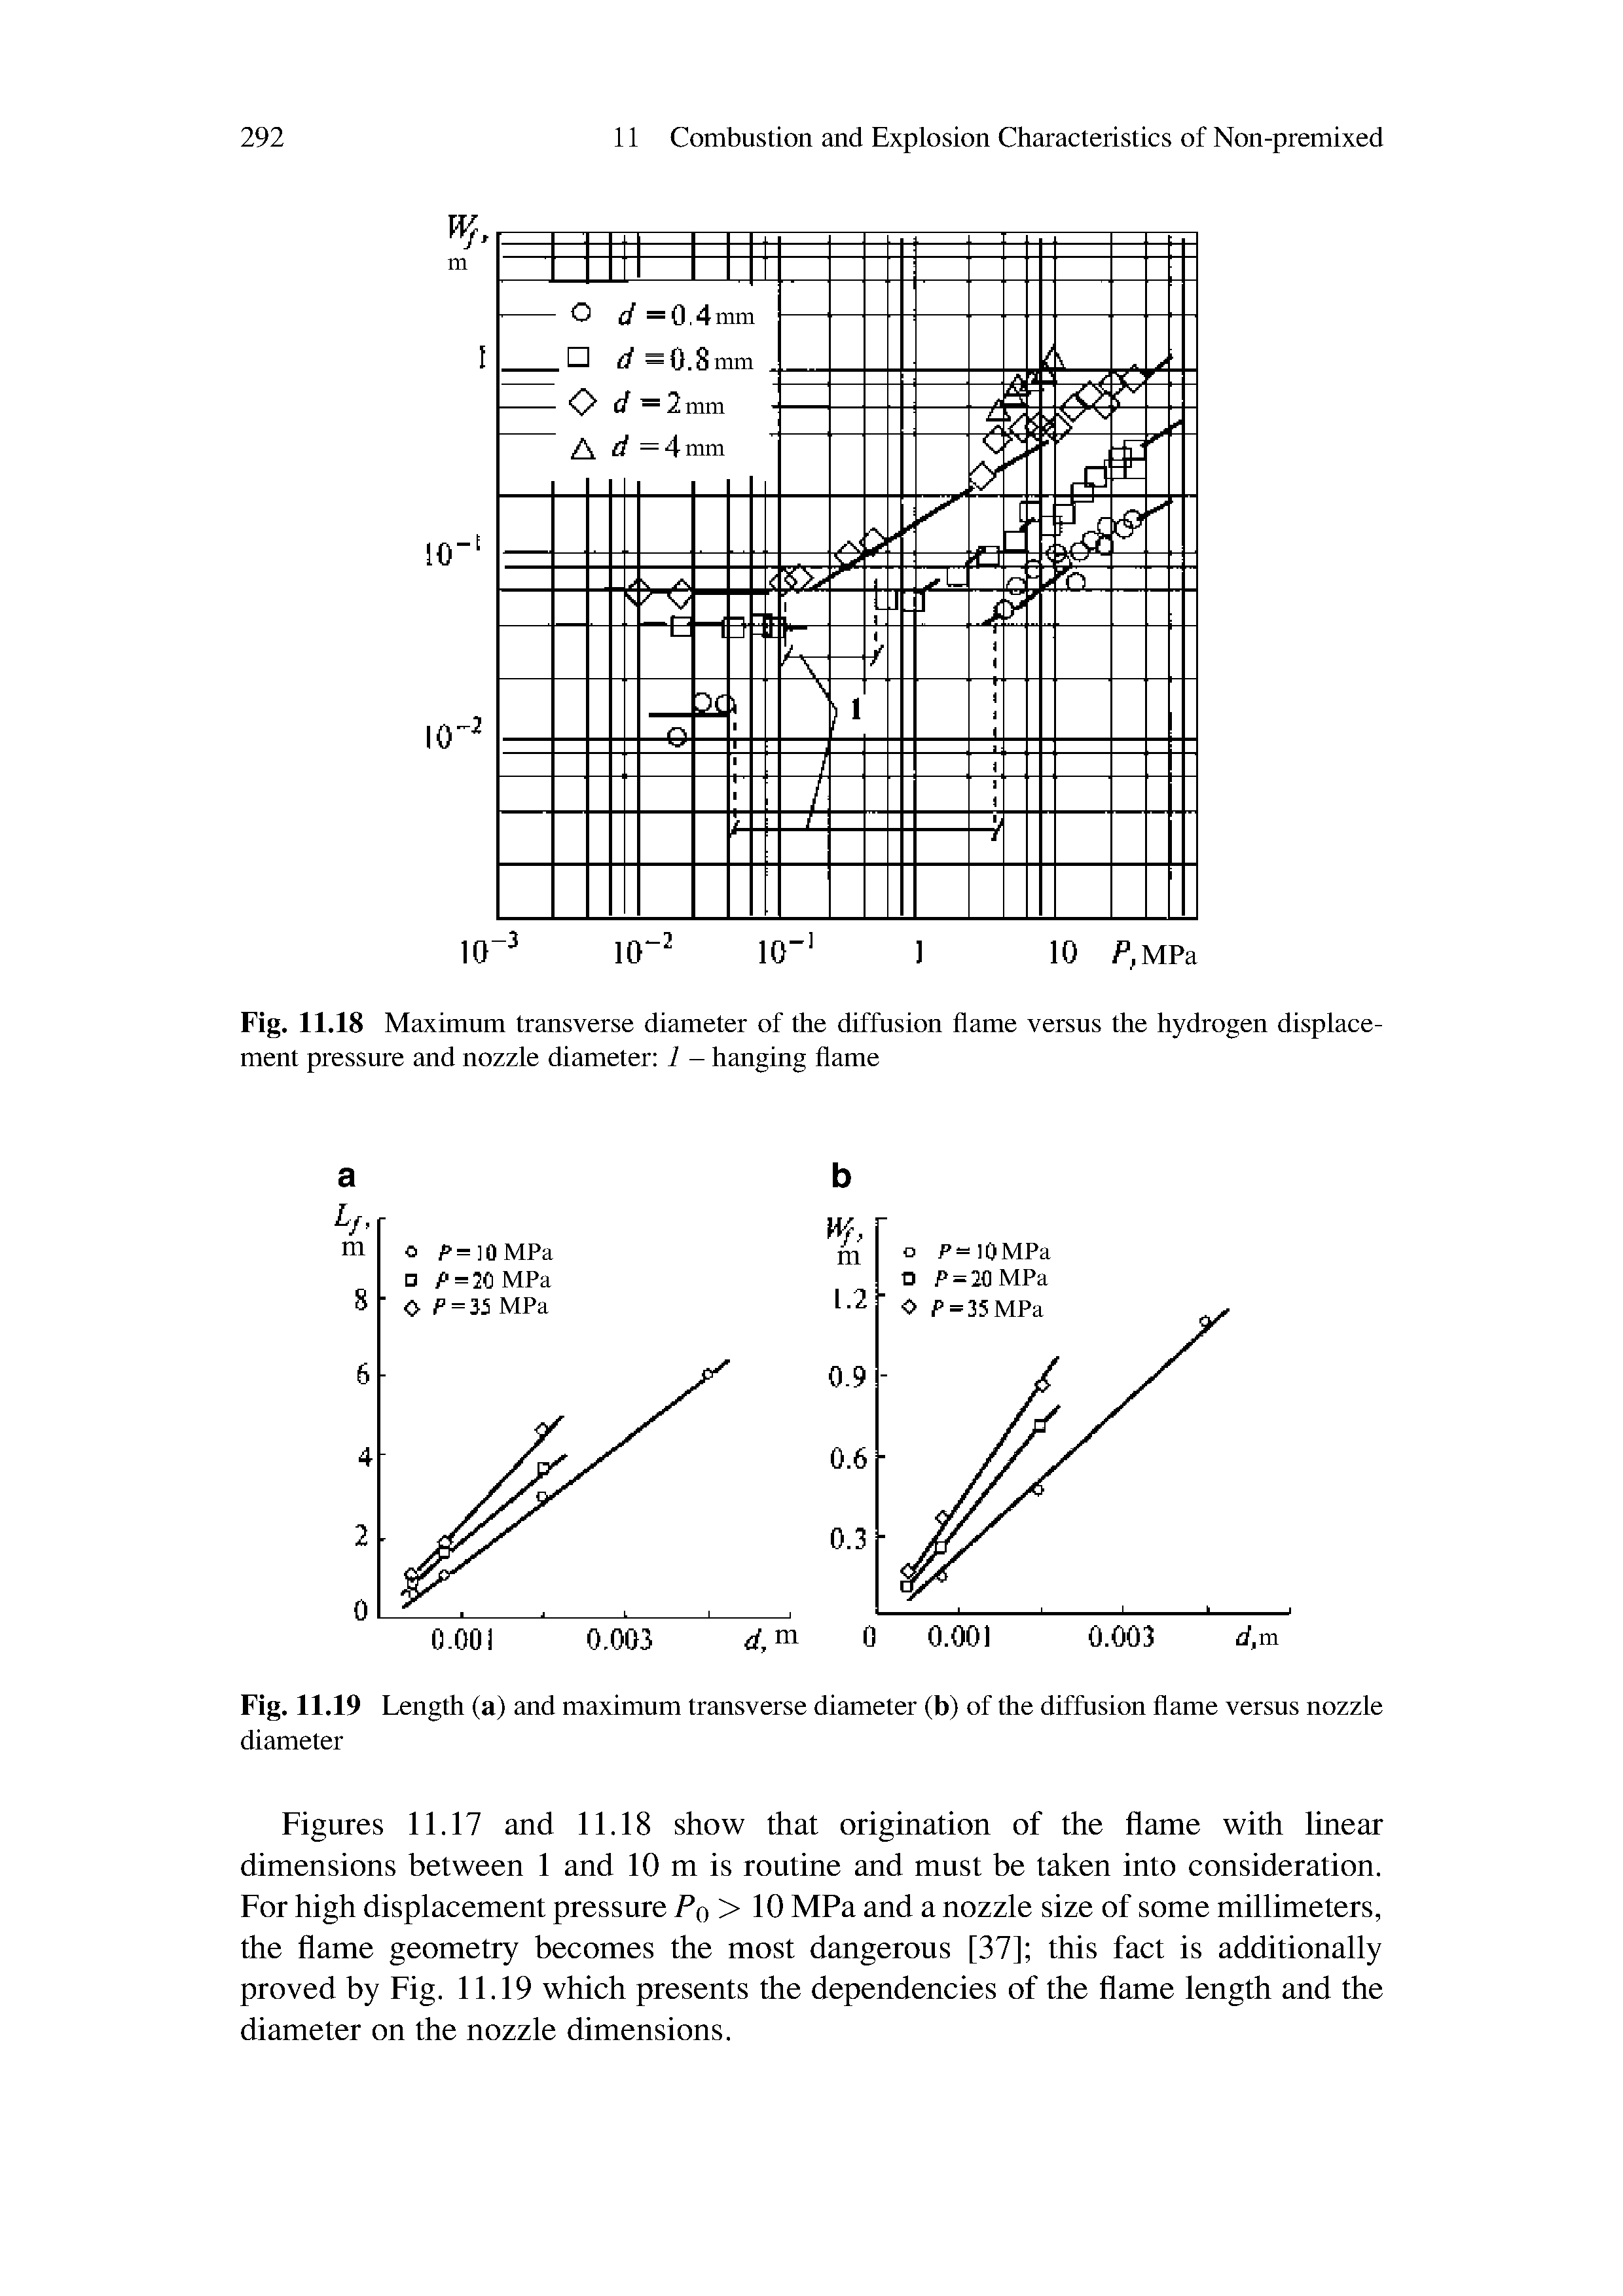 Figures 11.17 and 11.18 show that origination of the flame with linear dimensions between 1 and 10 m is routine and must be taken into consideration. For high displacement pressure Fq > 10 MPa and a nozzle size of some millimeters, the flame geometry becomes the most dangerous [37] this fact is additionally proved by Fig. 11.19 which presents the dependencies of the flame length and the diameter on the nozzle dimensions.